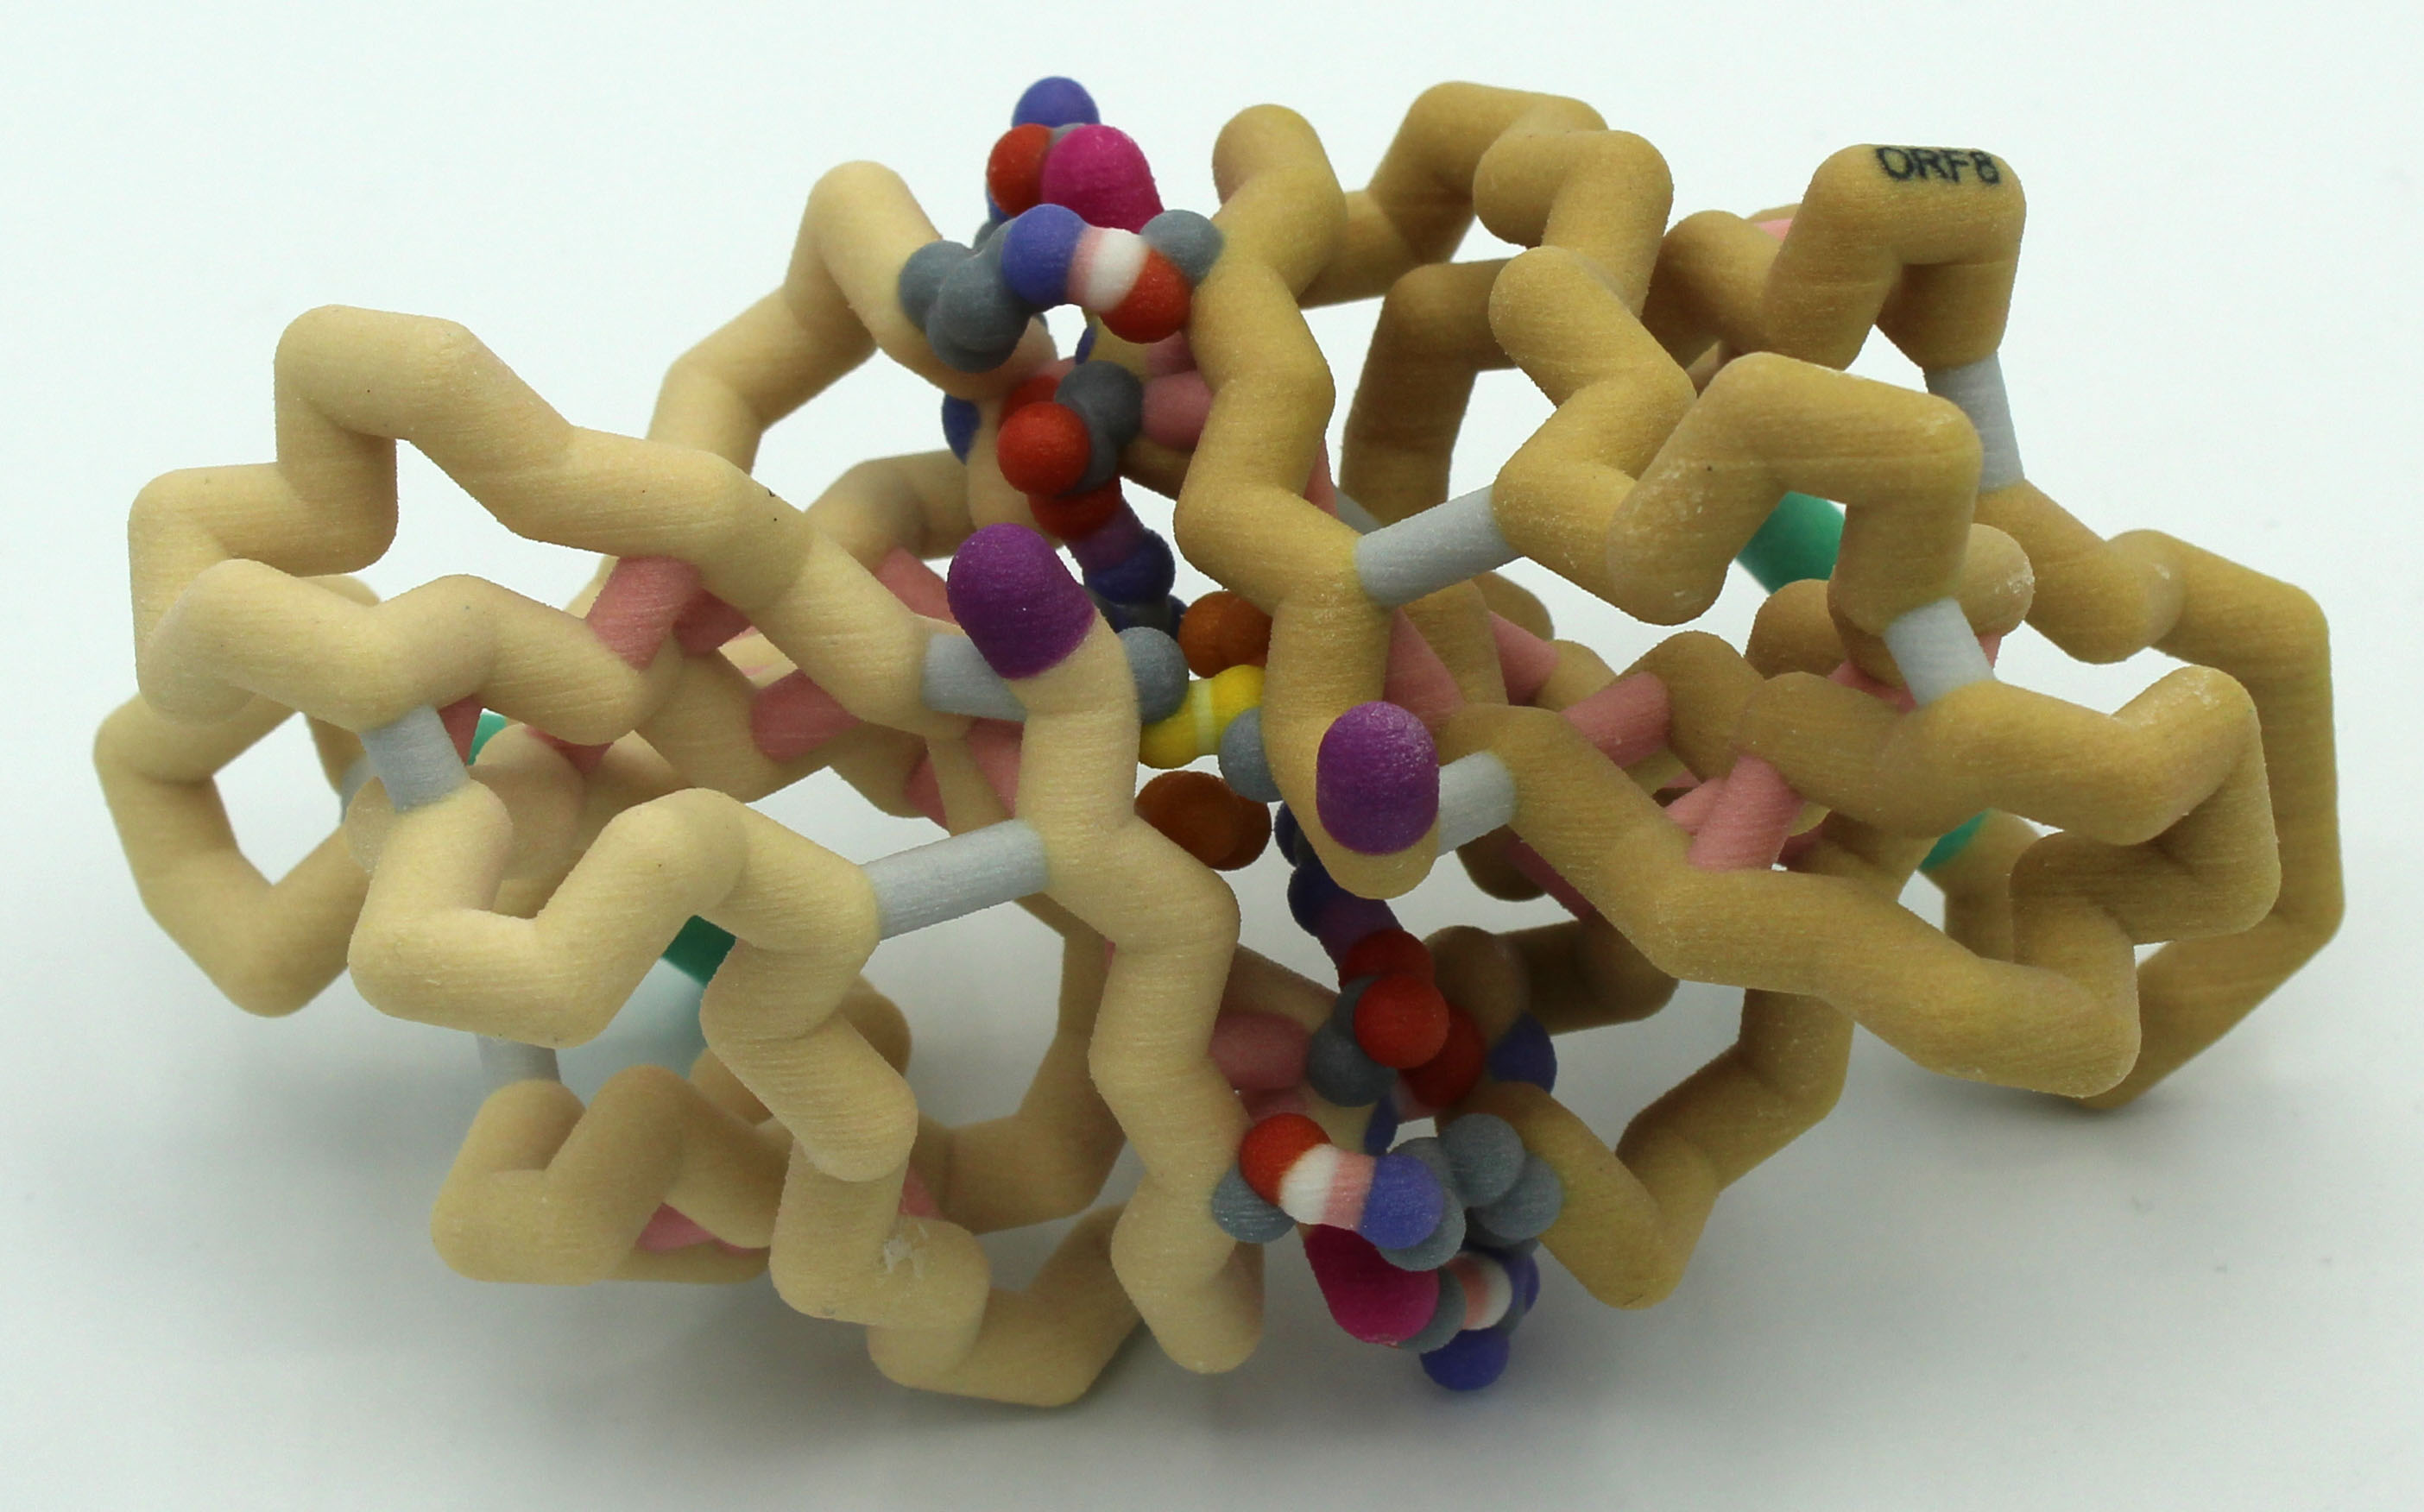 Physical model of SARS-CoV-2 ORF8 dimer